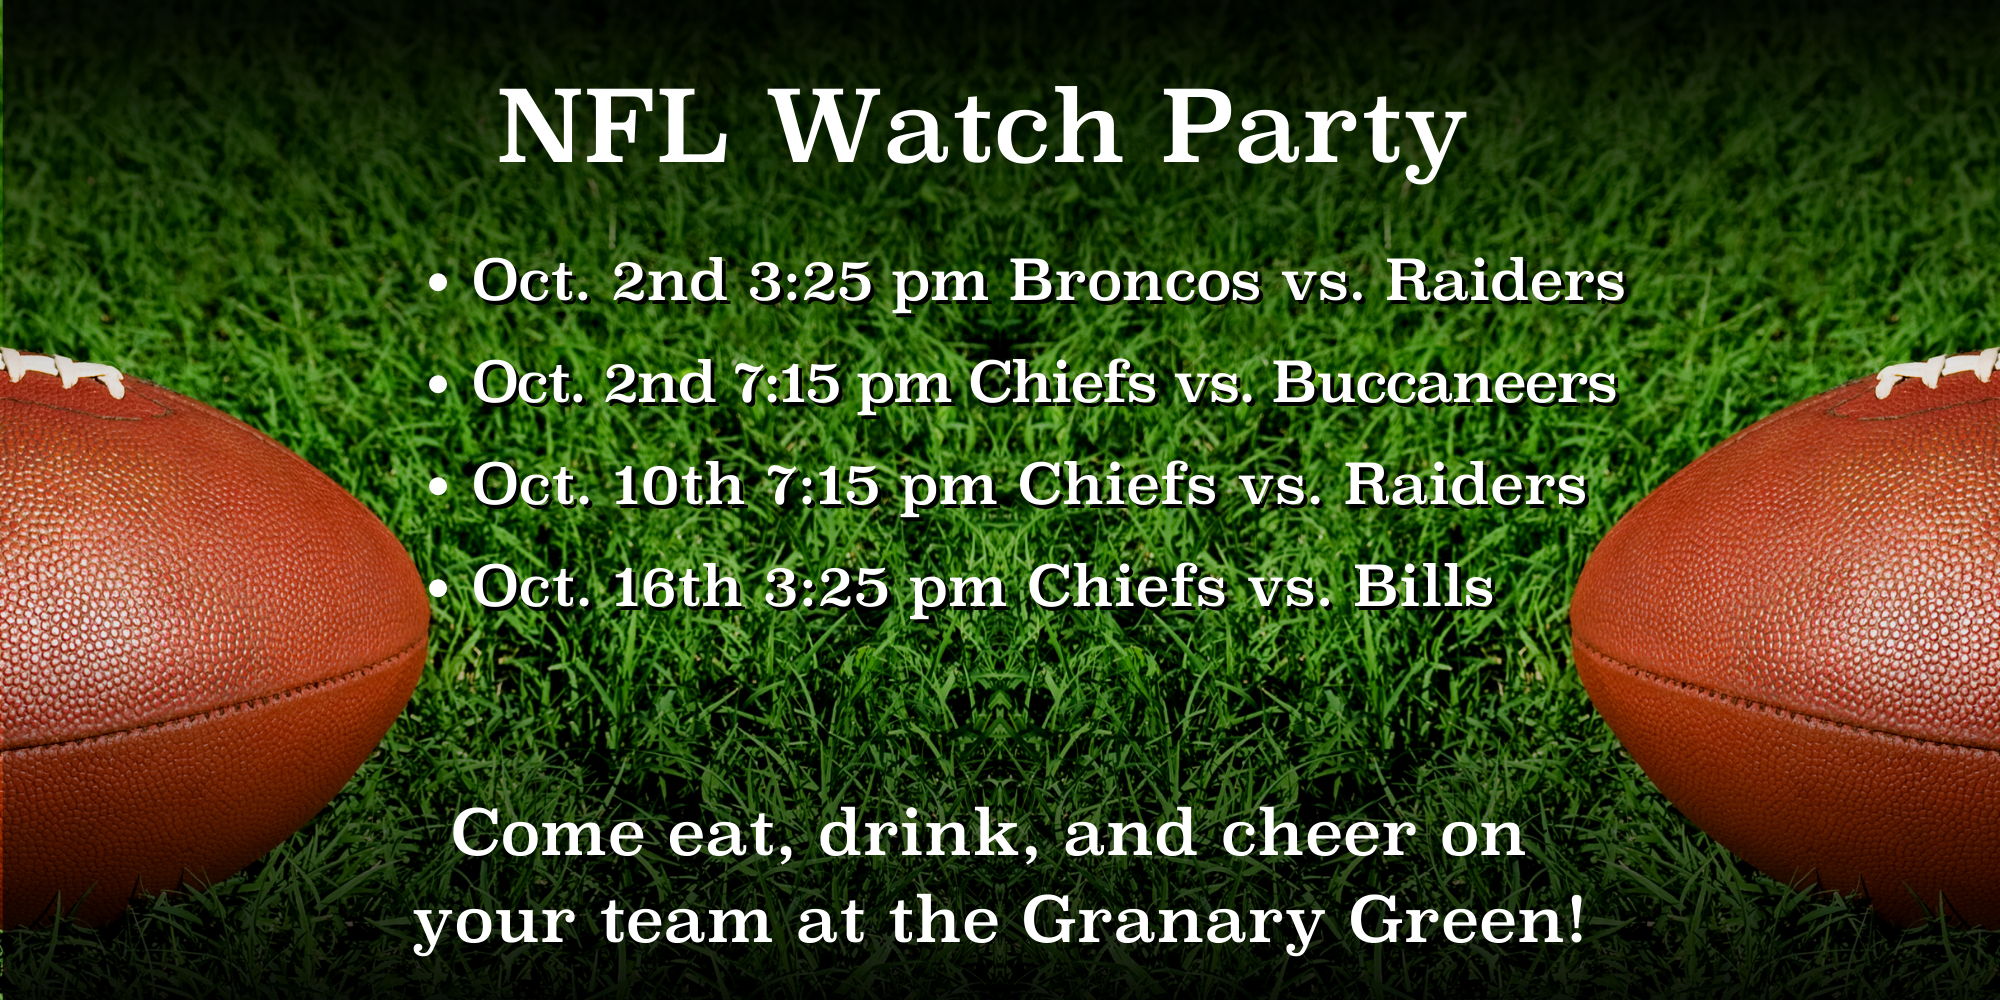 NFL Watch Party (Broncos v. Raiders & Chiefs V. Buccaneers) promotional image